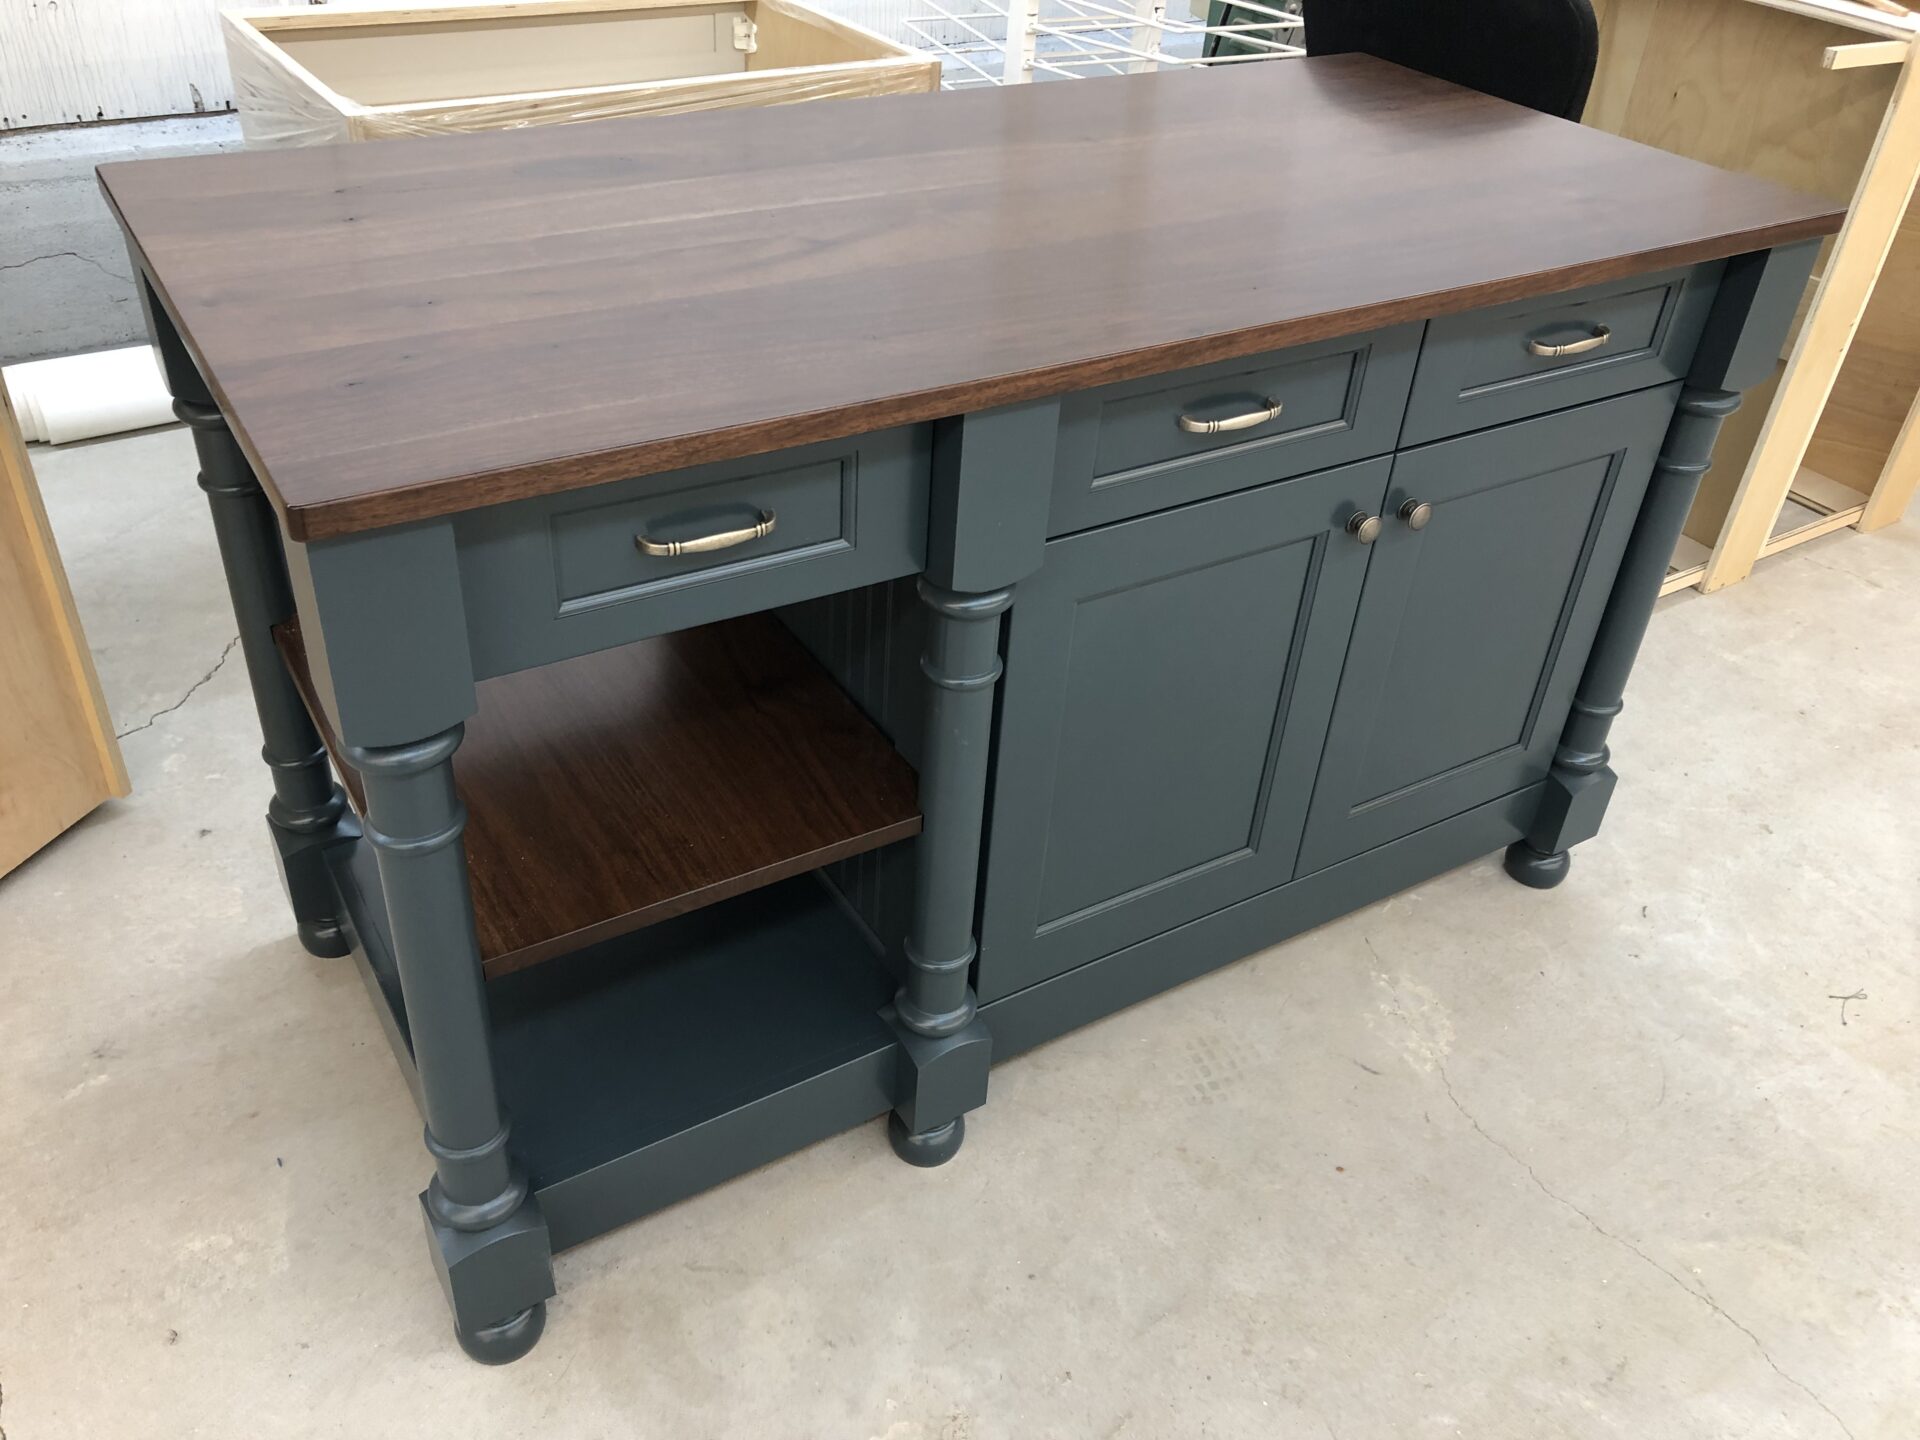 a dark-colored cabinet with a solid wood surface top